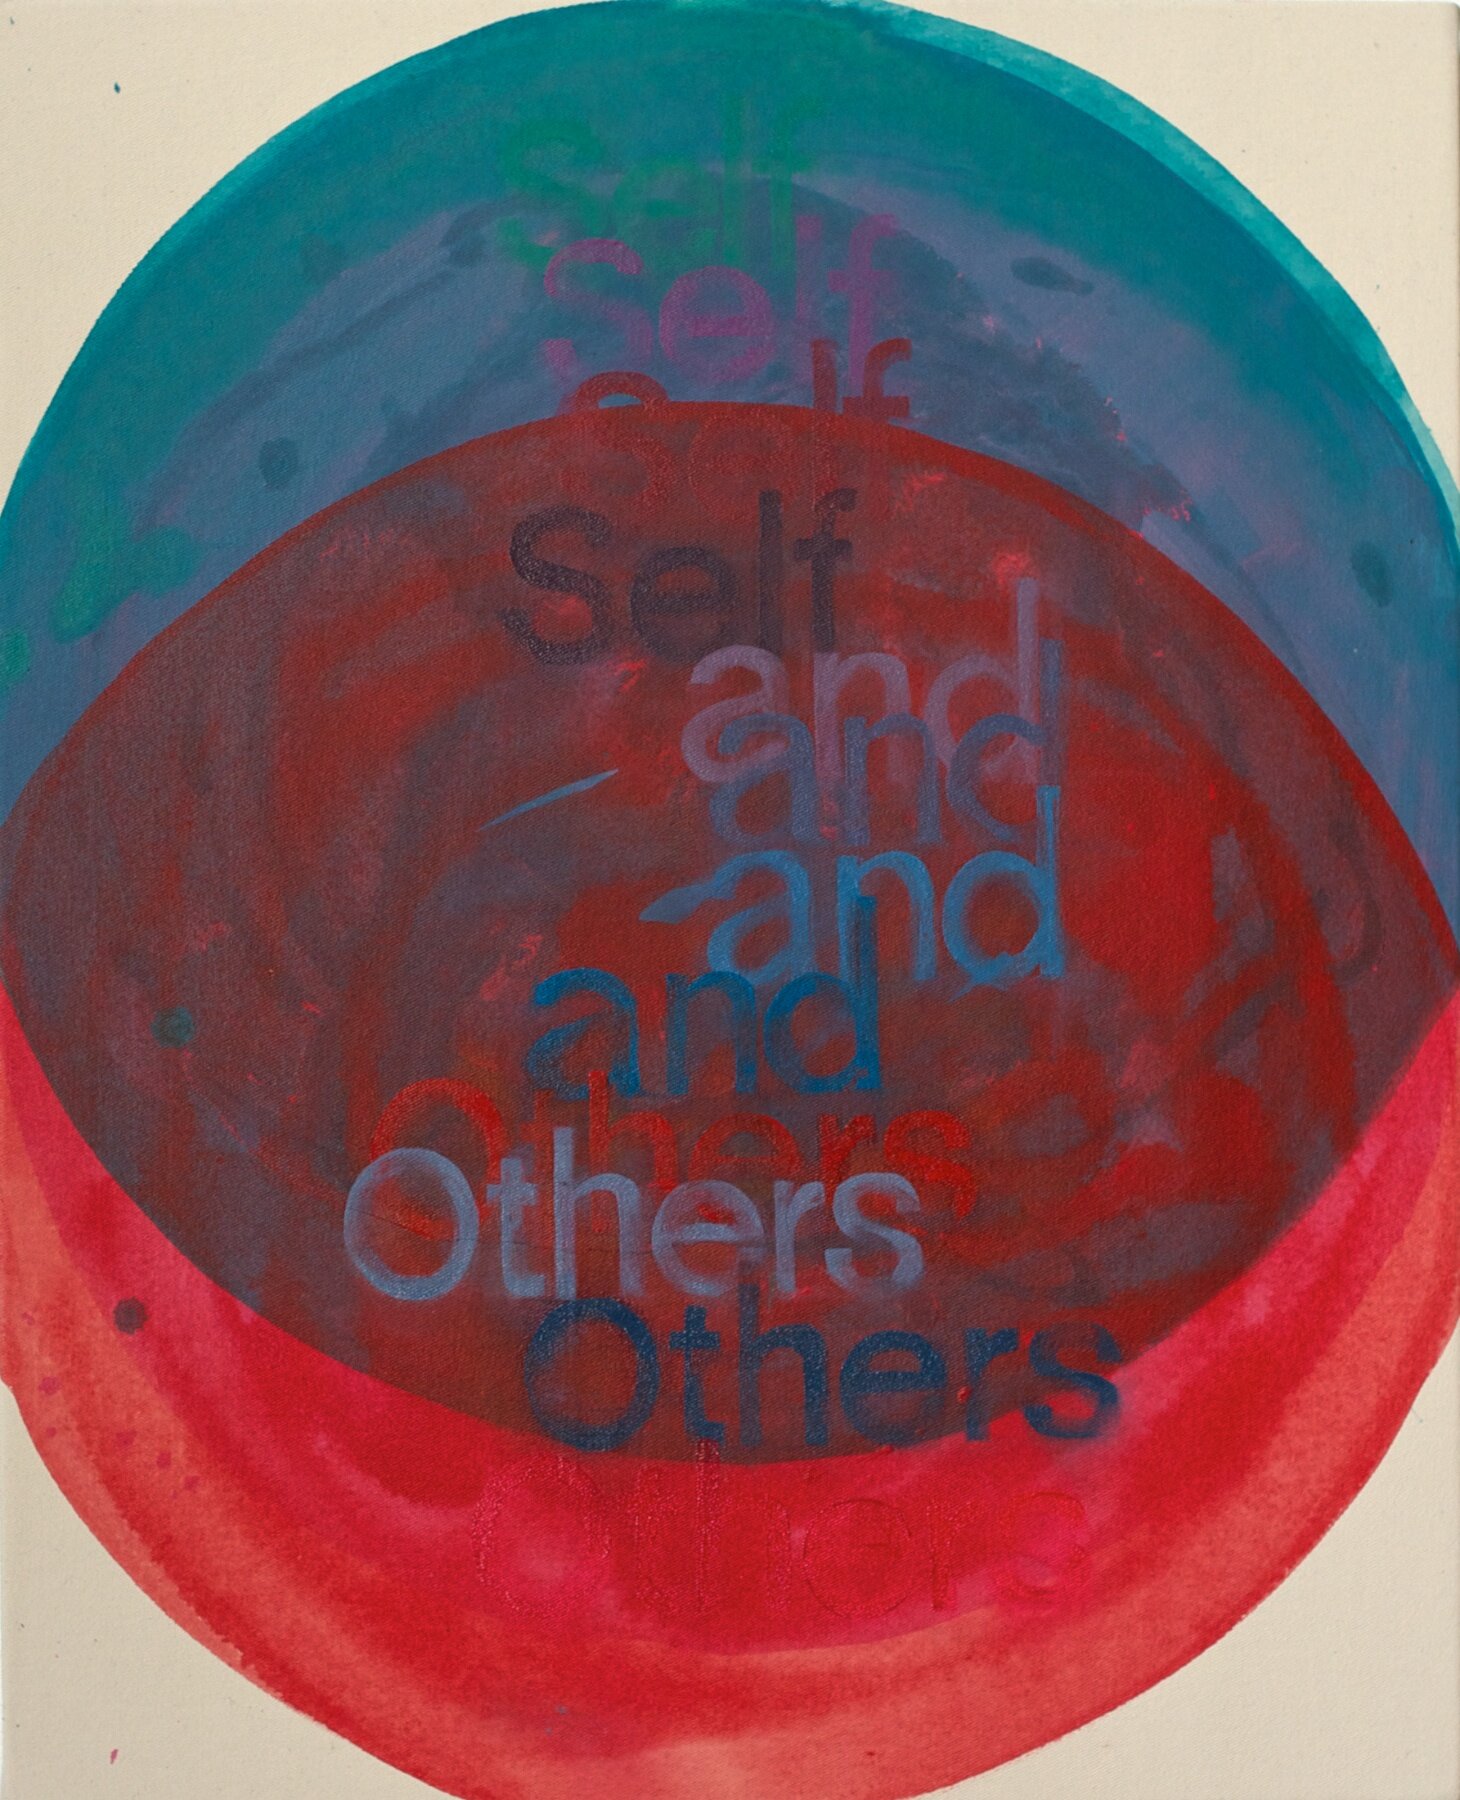 Self and Others, no. 1